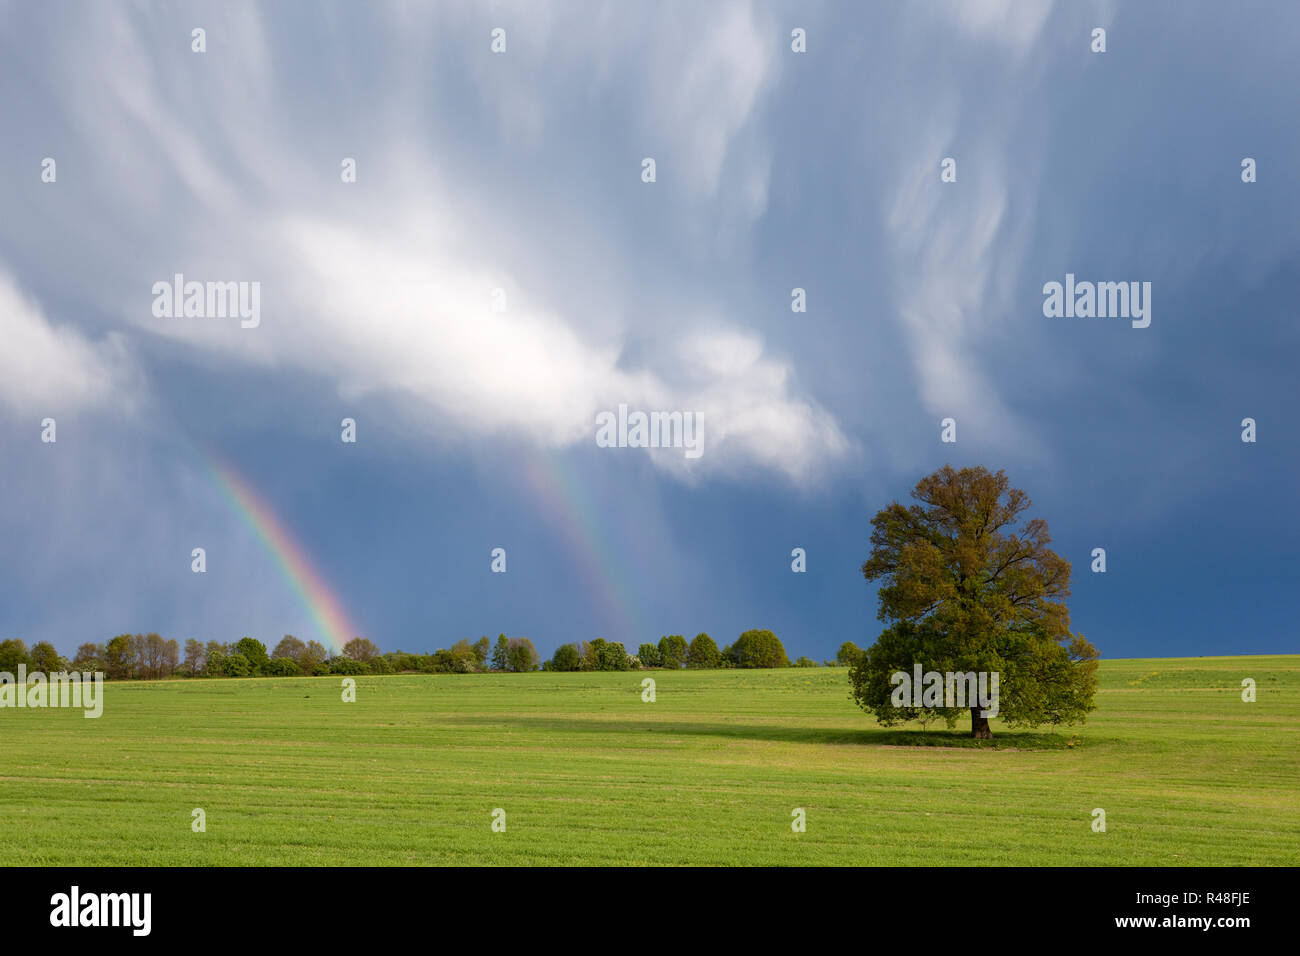 single tree in the field and a thundercloud with rainbow in the hood Stock Photo